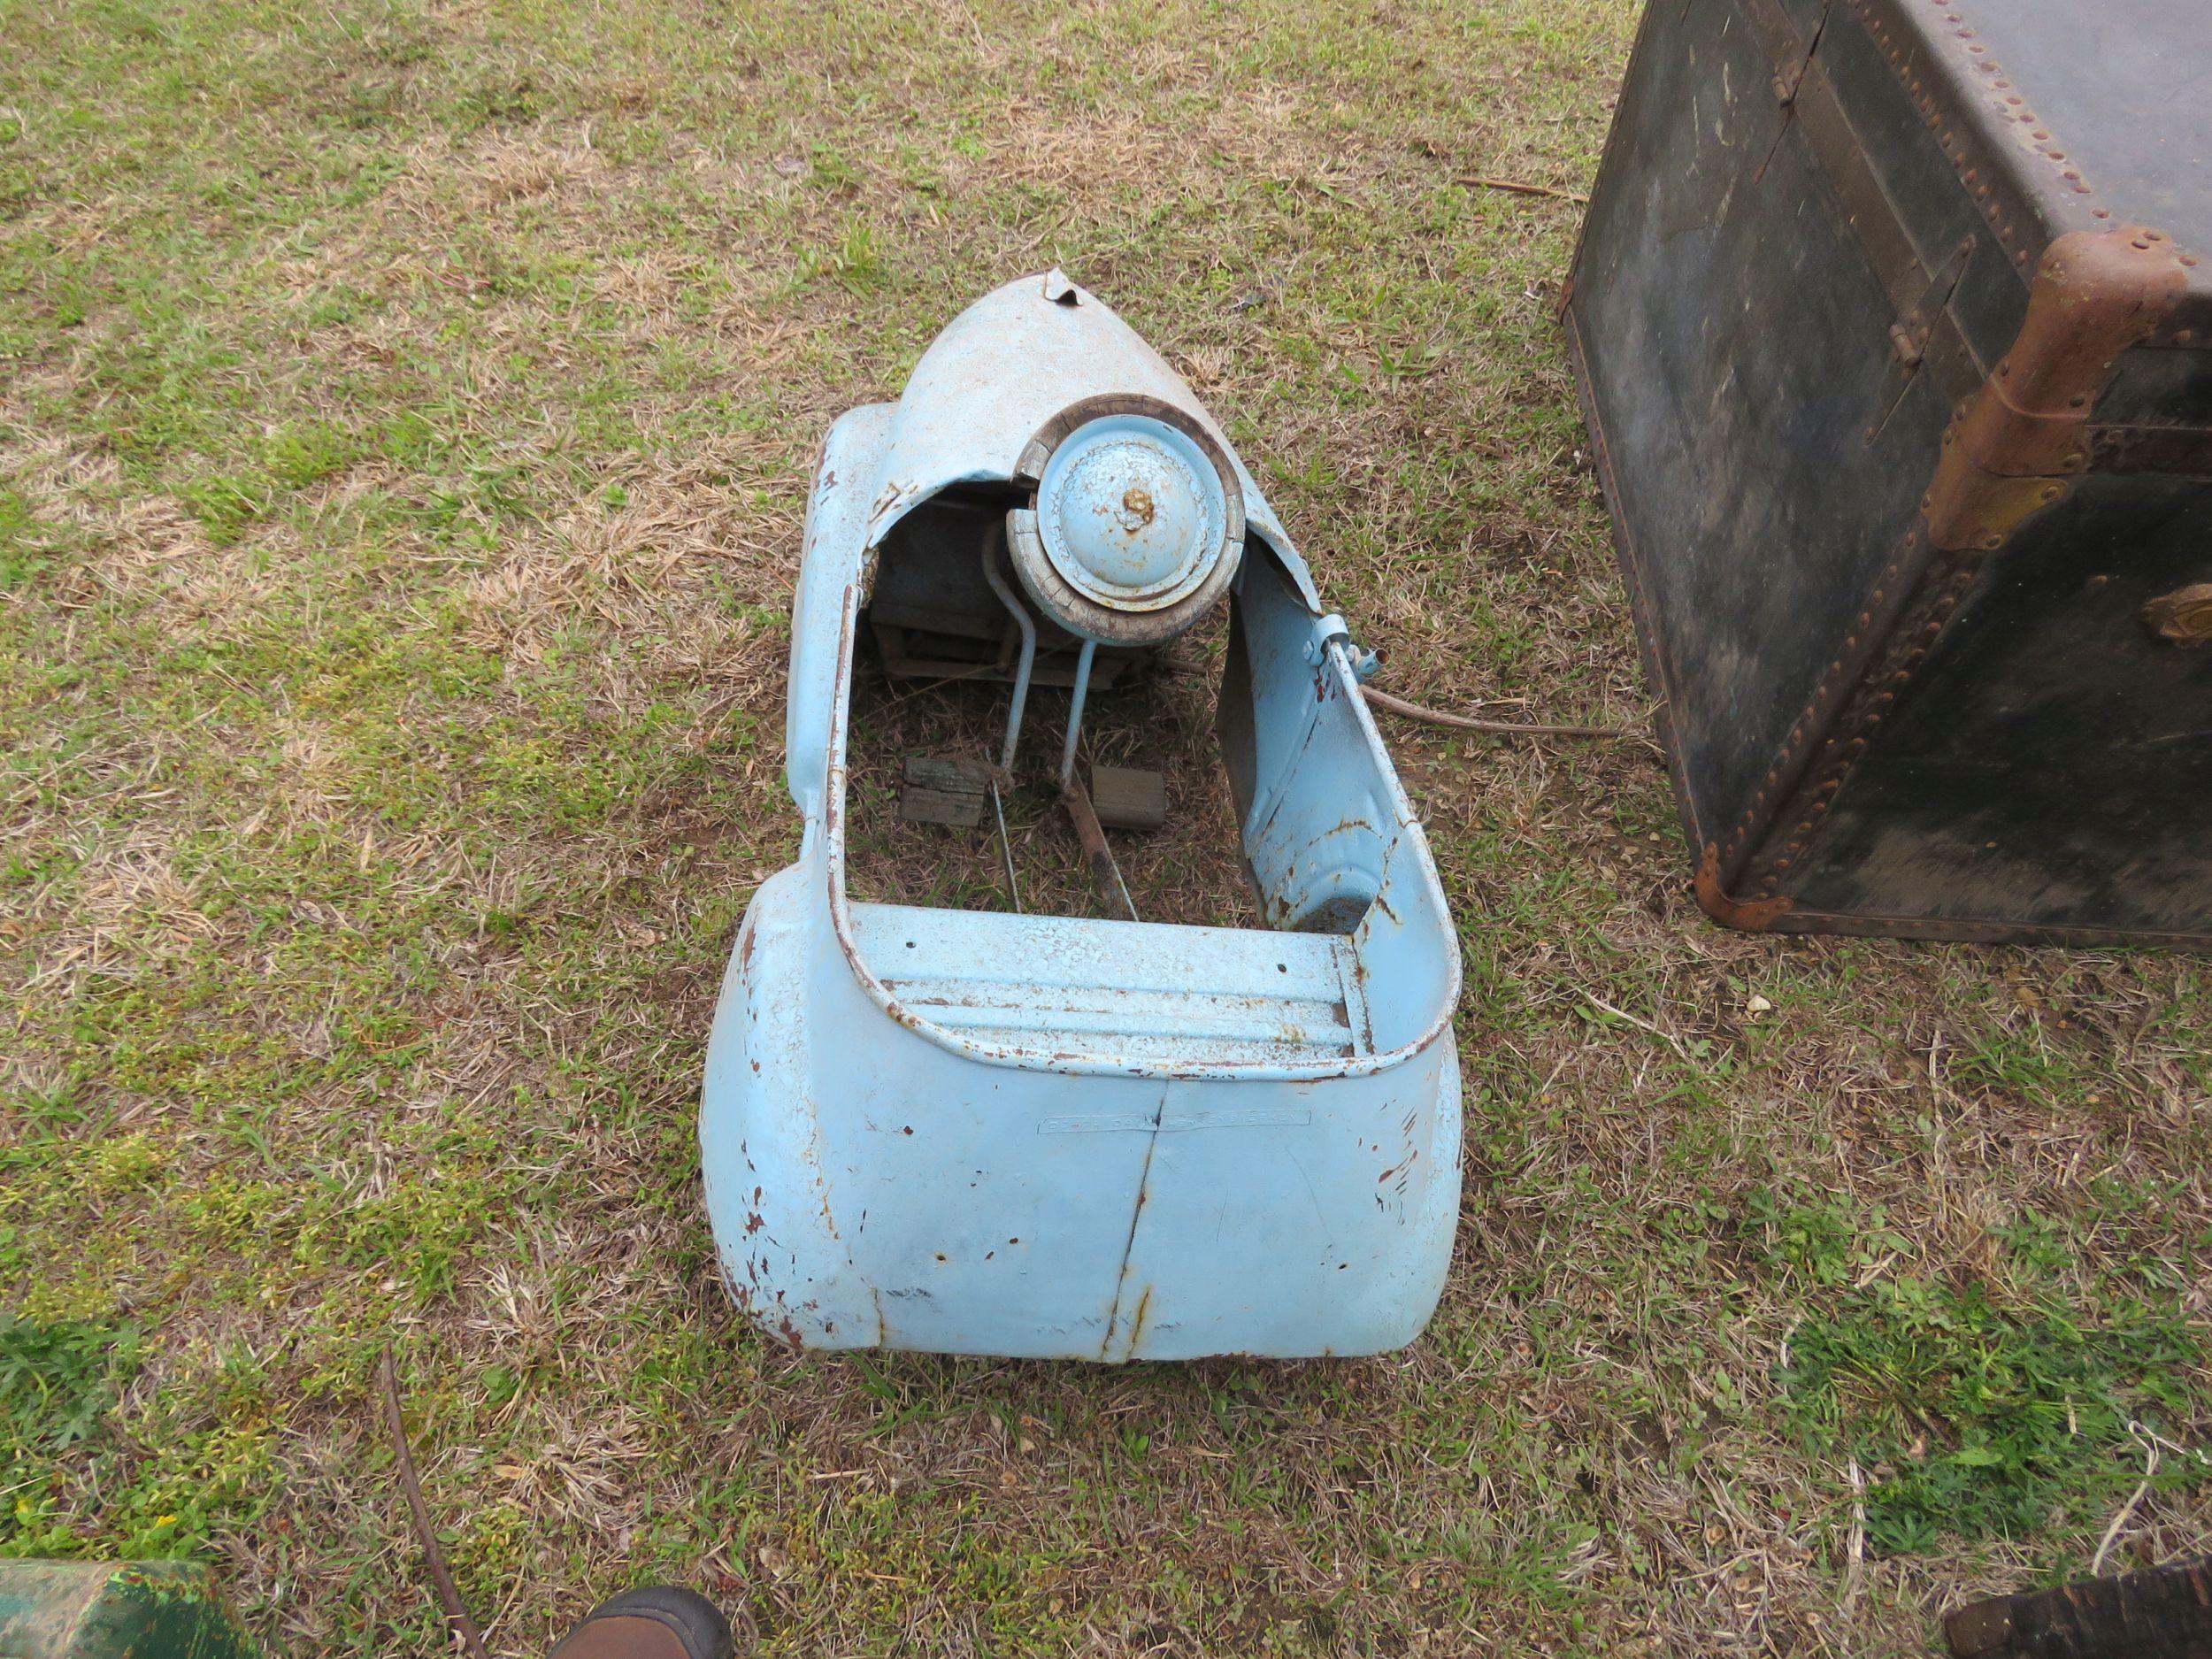 PEDAL CAR FOR RESTORE